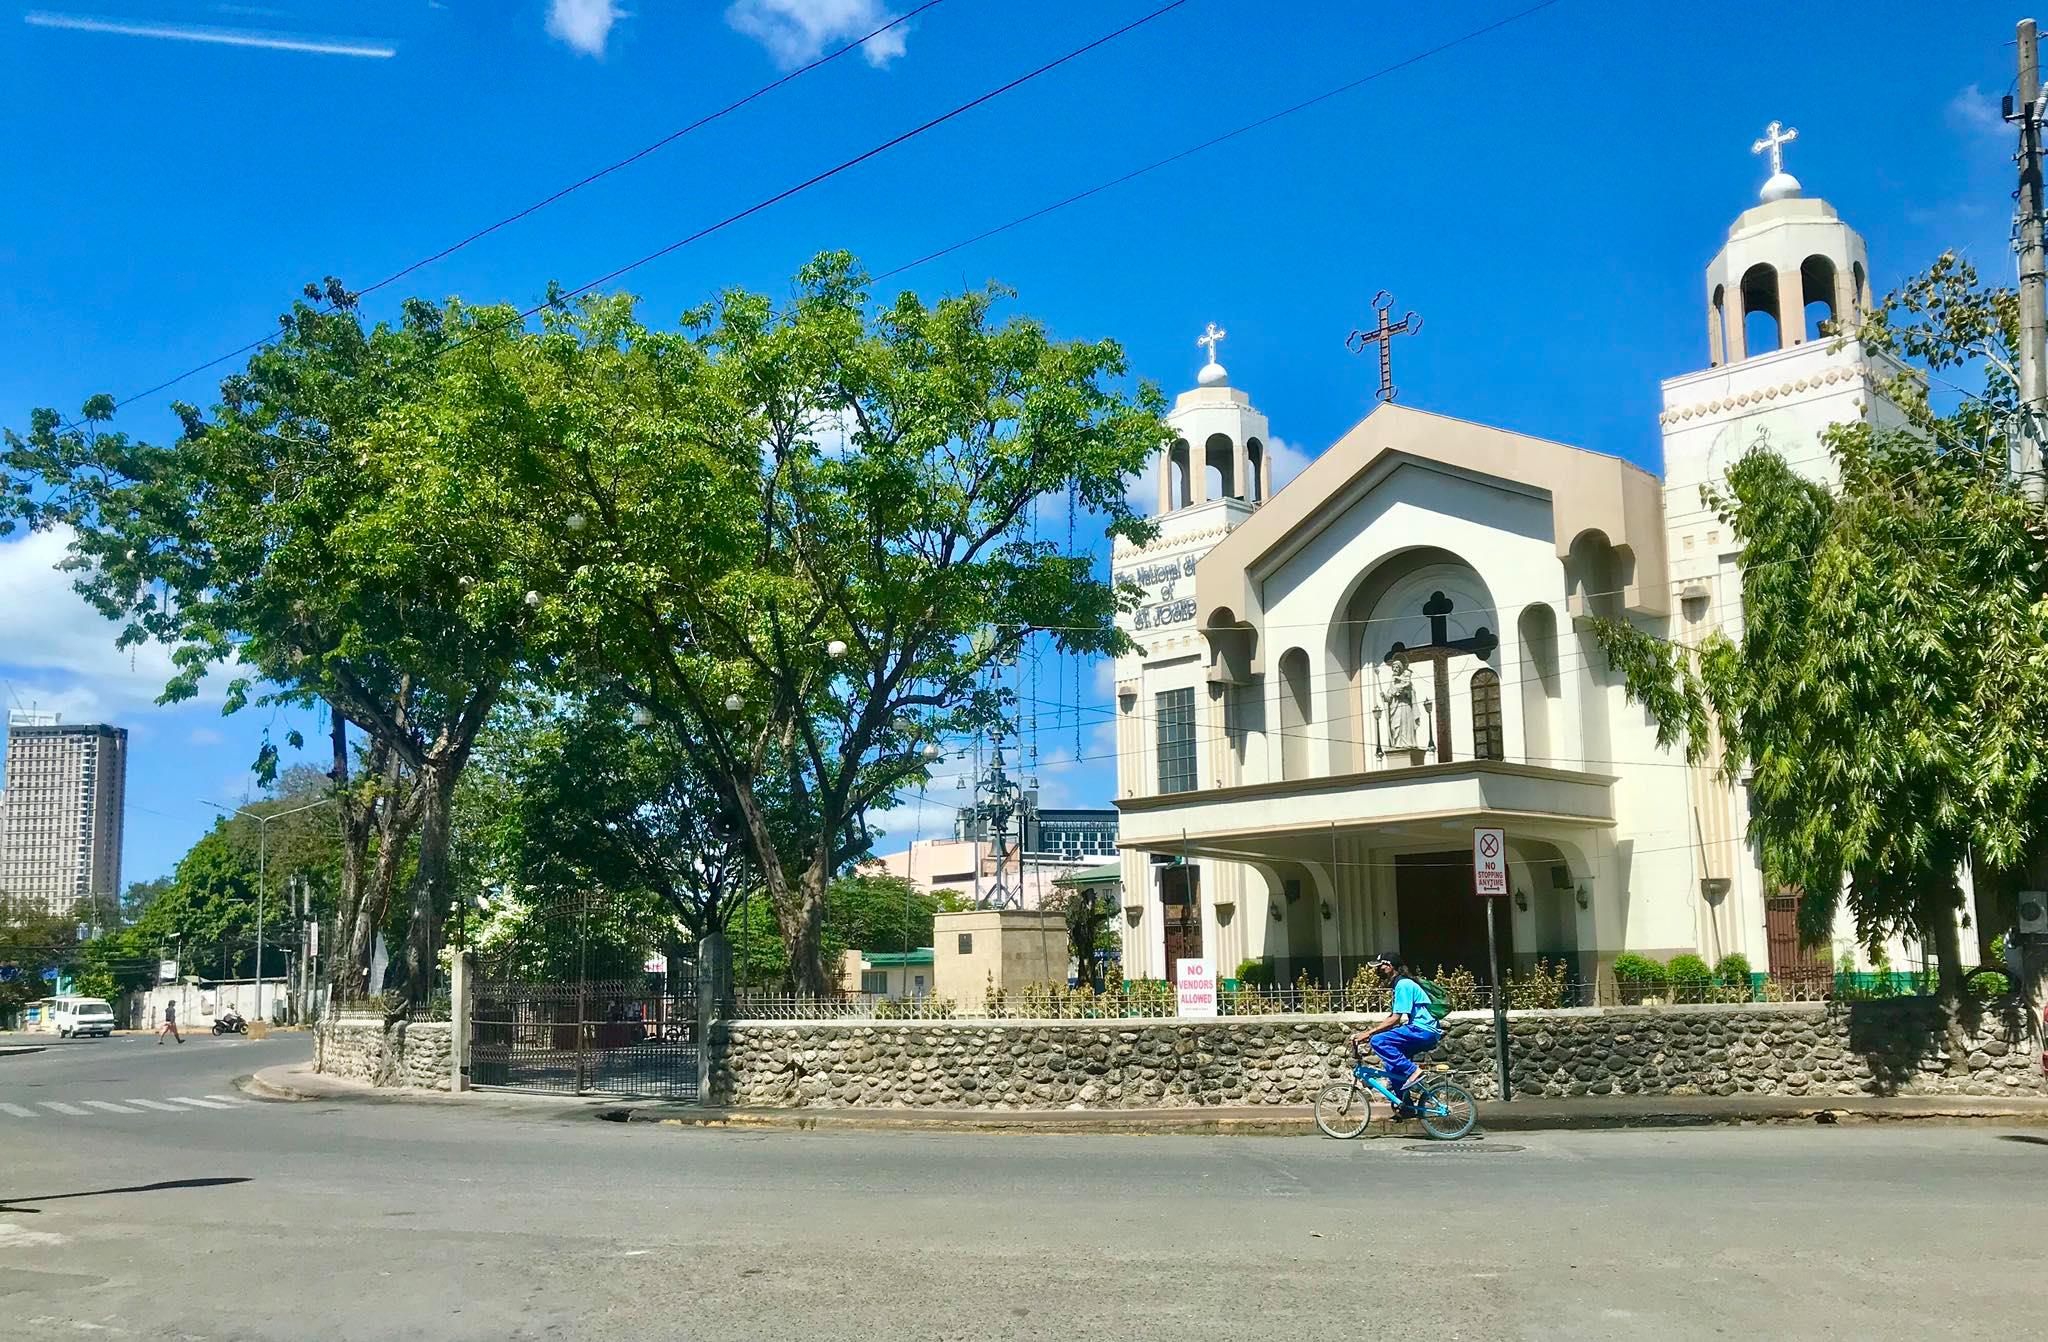 Lent activities stopped but not the faith. The National Shrine of St. Joseph in Mandaue City remains empty on Sunday, April 5, despite the observance of Palm Sunday. | Brian Ochoa